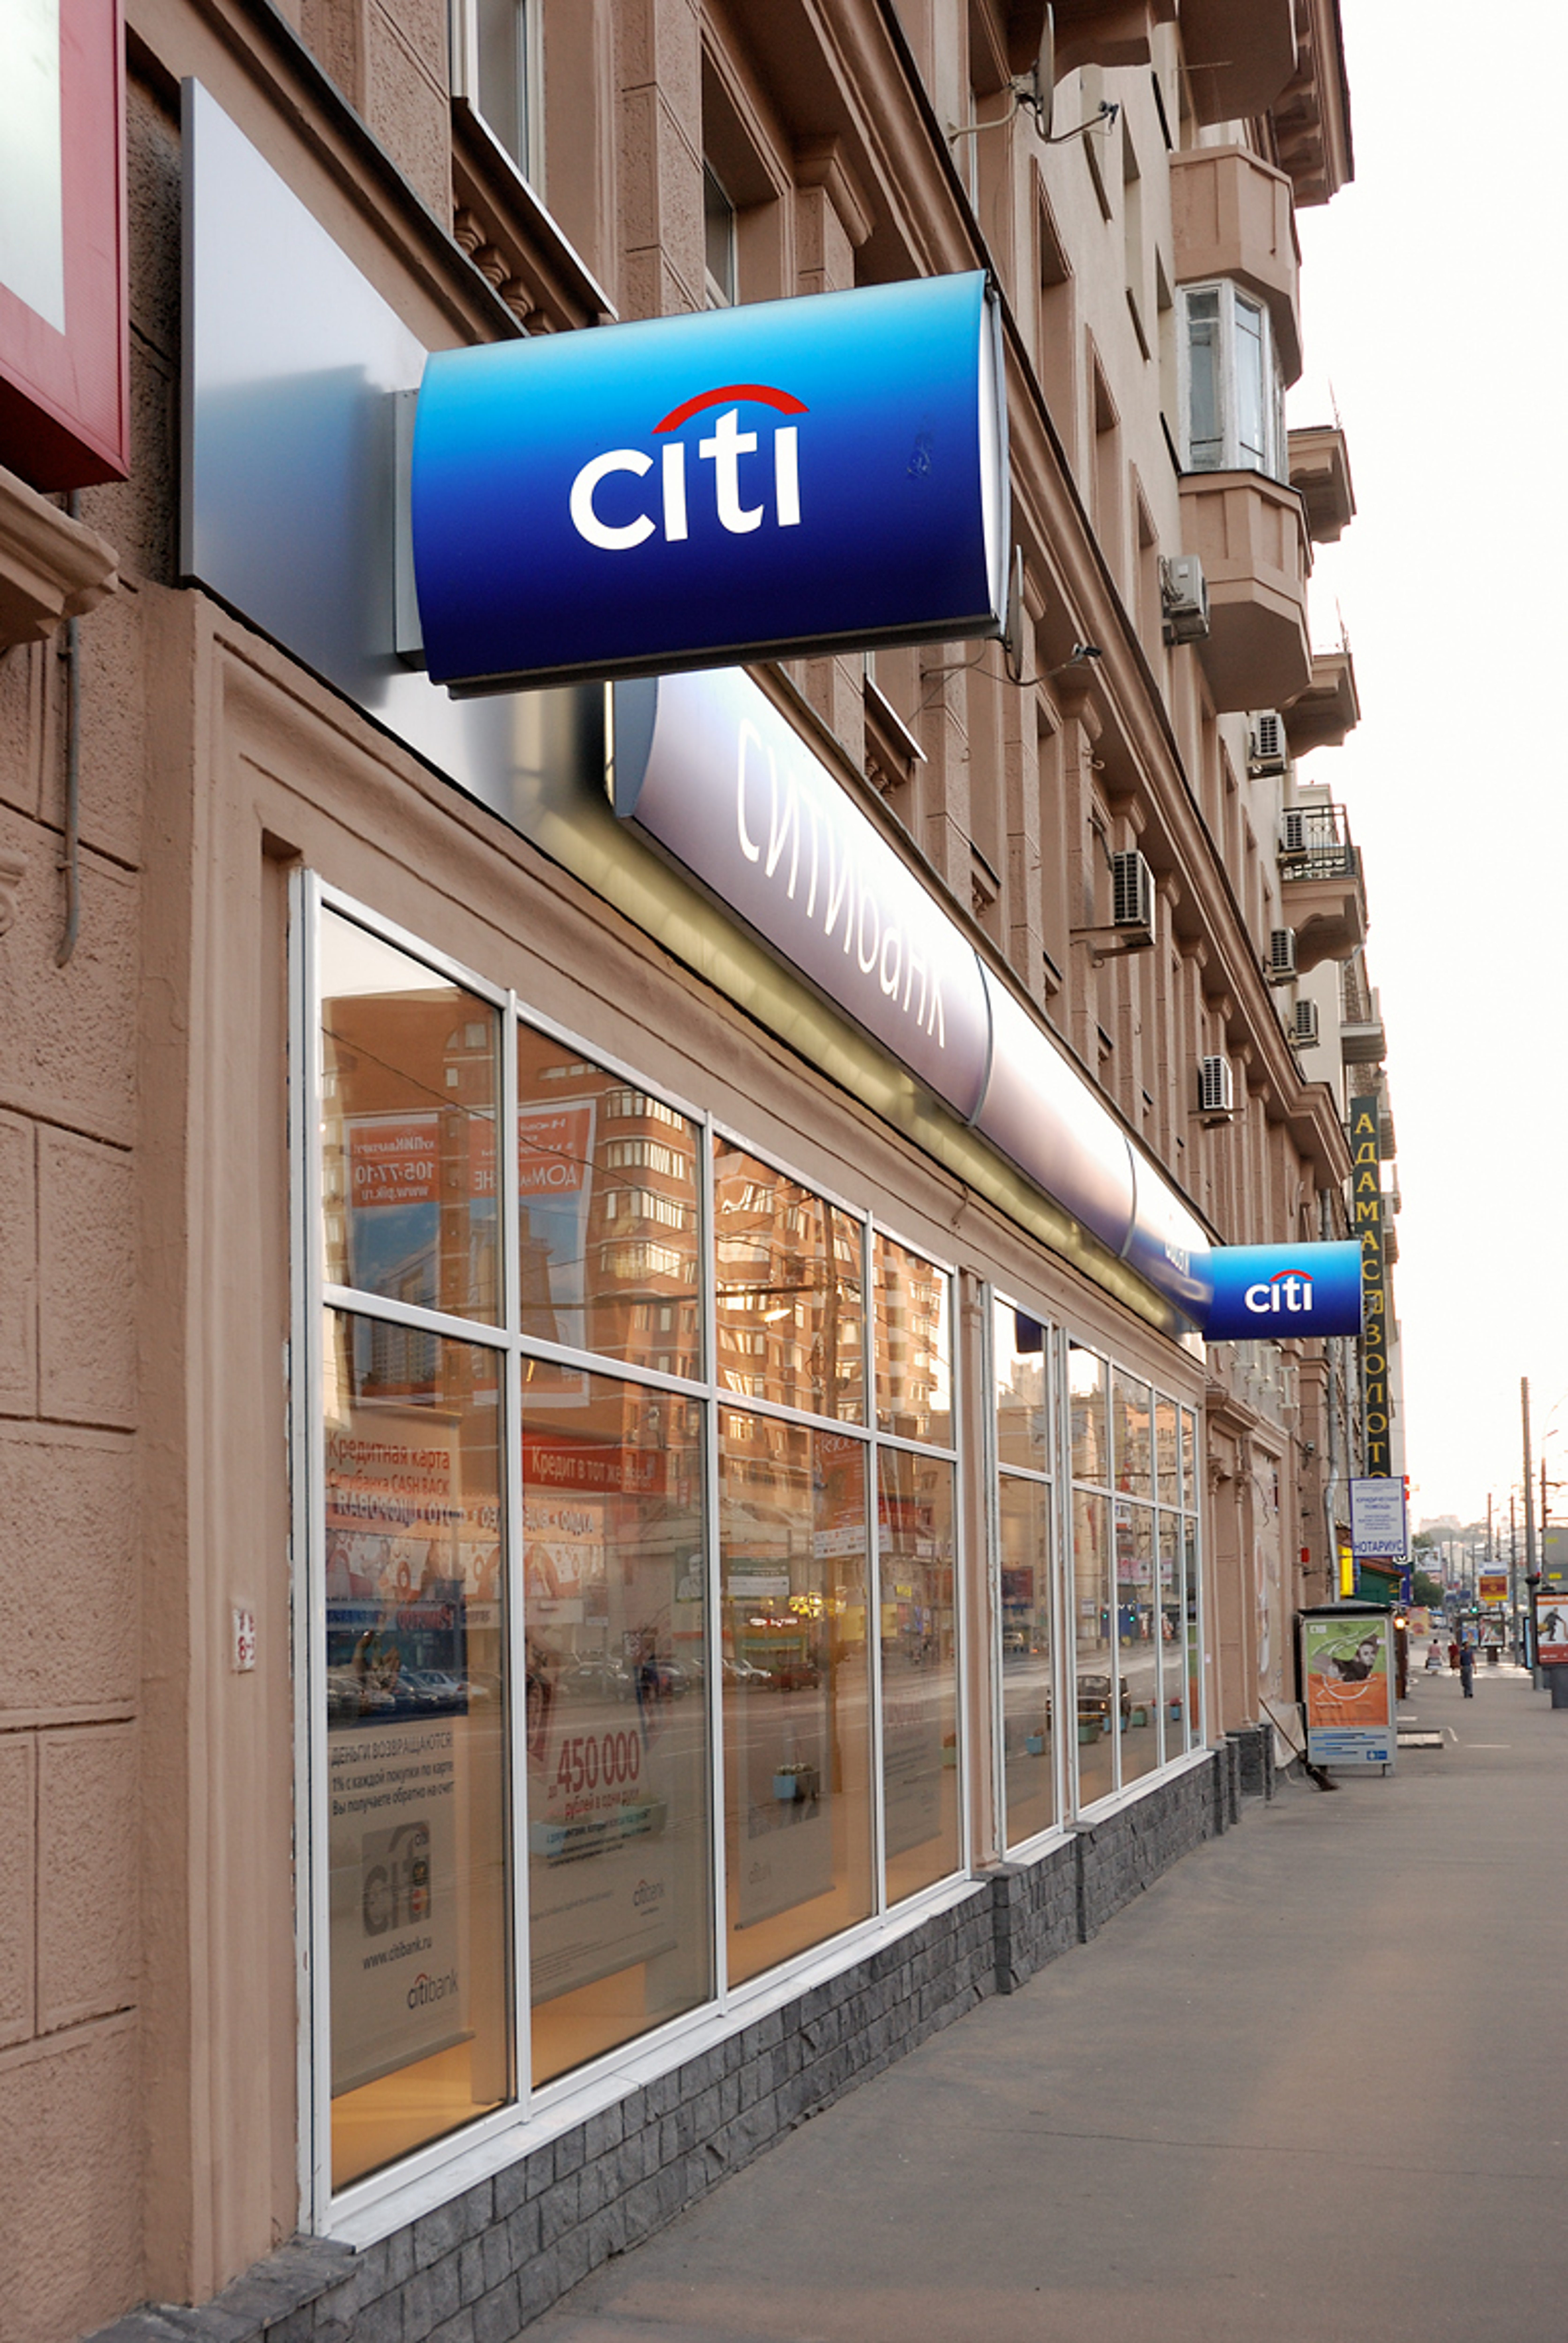 As Exiting Russia Becomes Complicated, Foreign Banks Like Citi Look To Hire People: Report